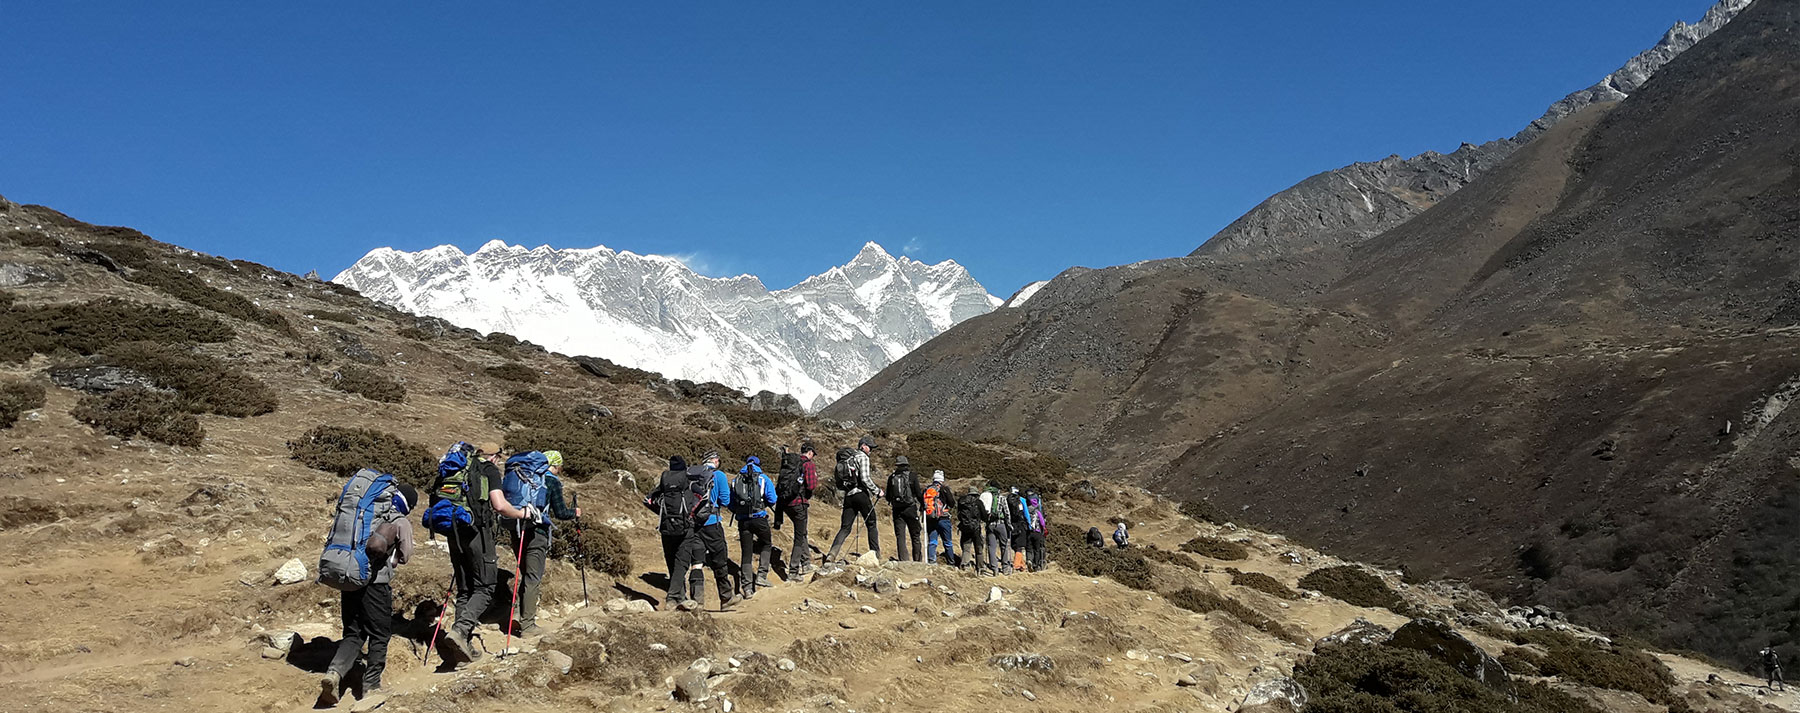 Tourists Must Be Accompanied by Guides When Trekking in Nepal from April 1st